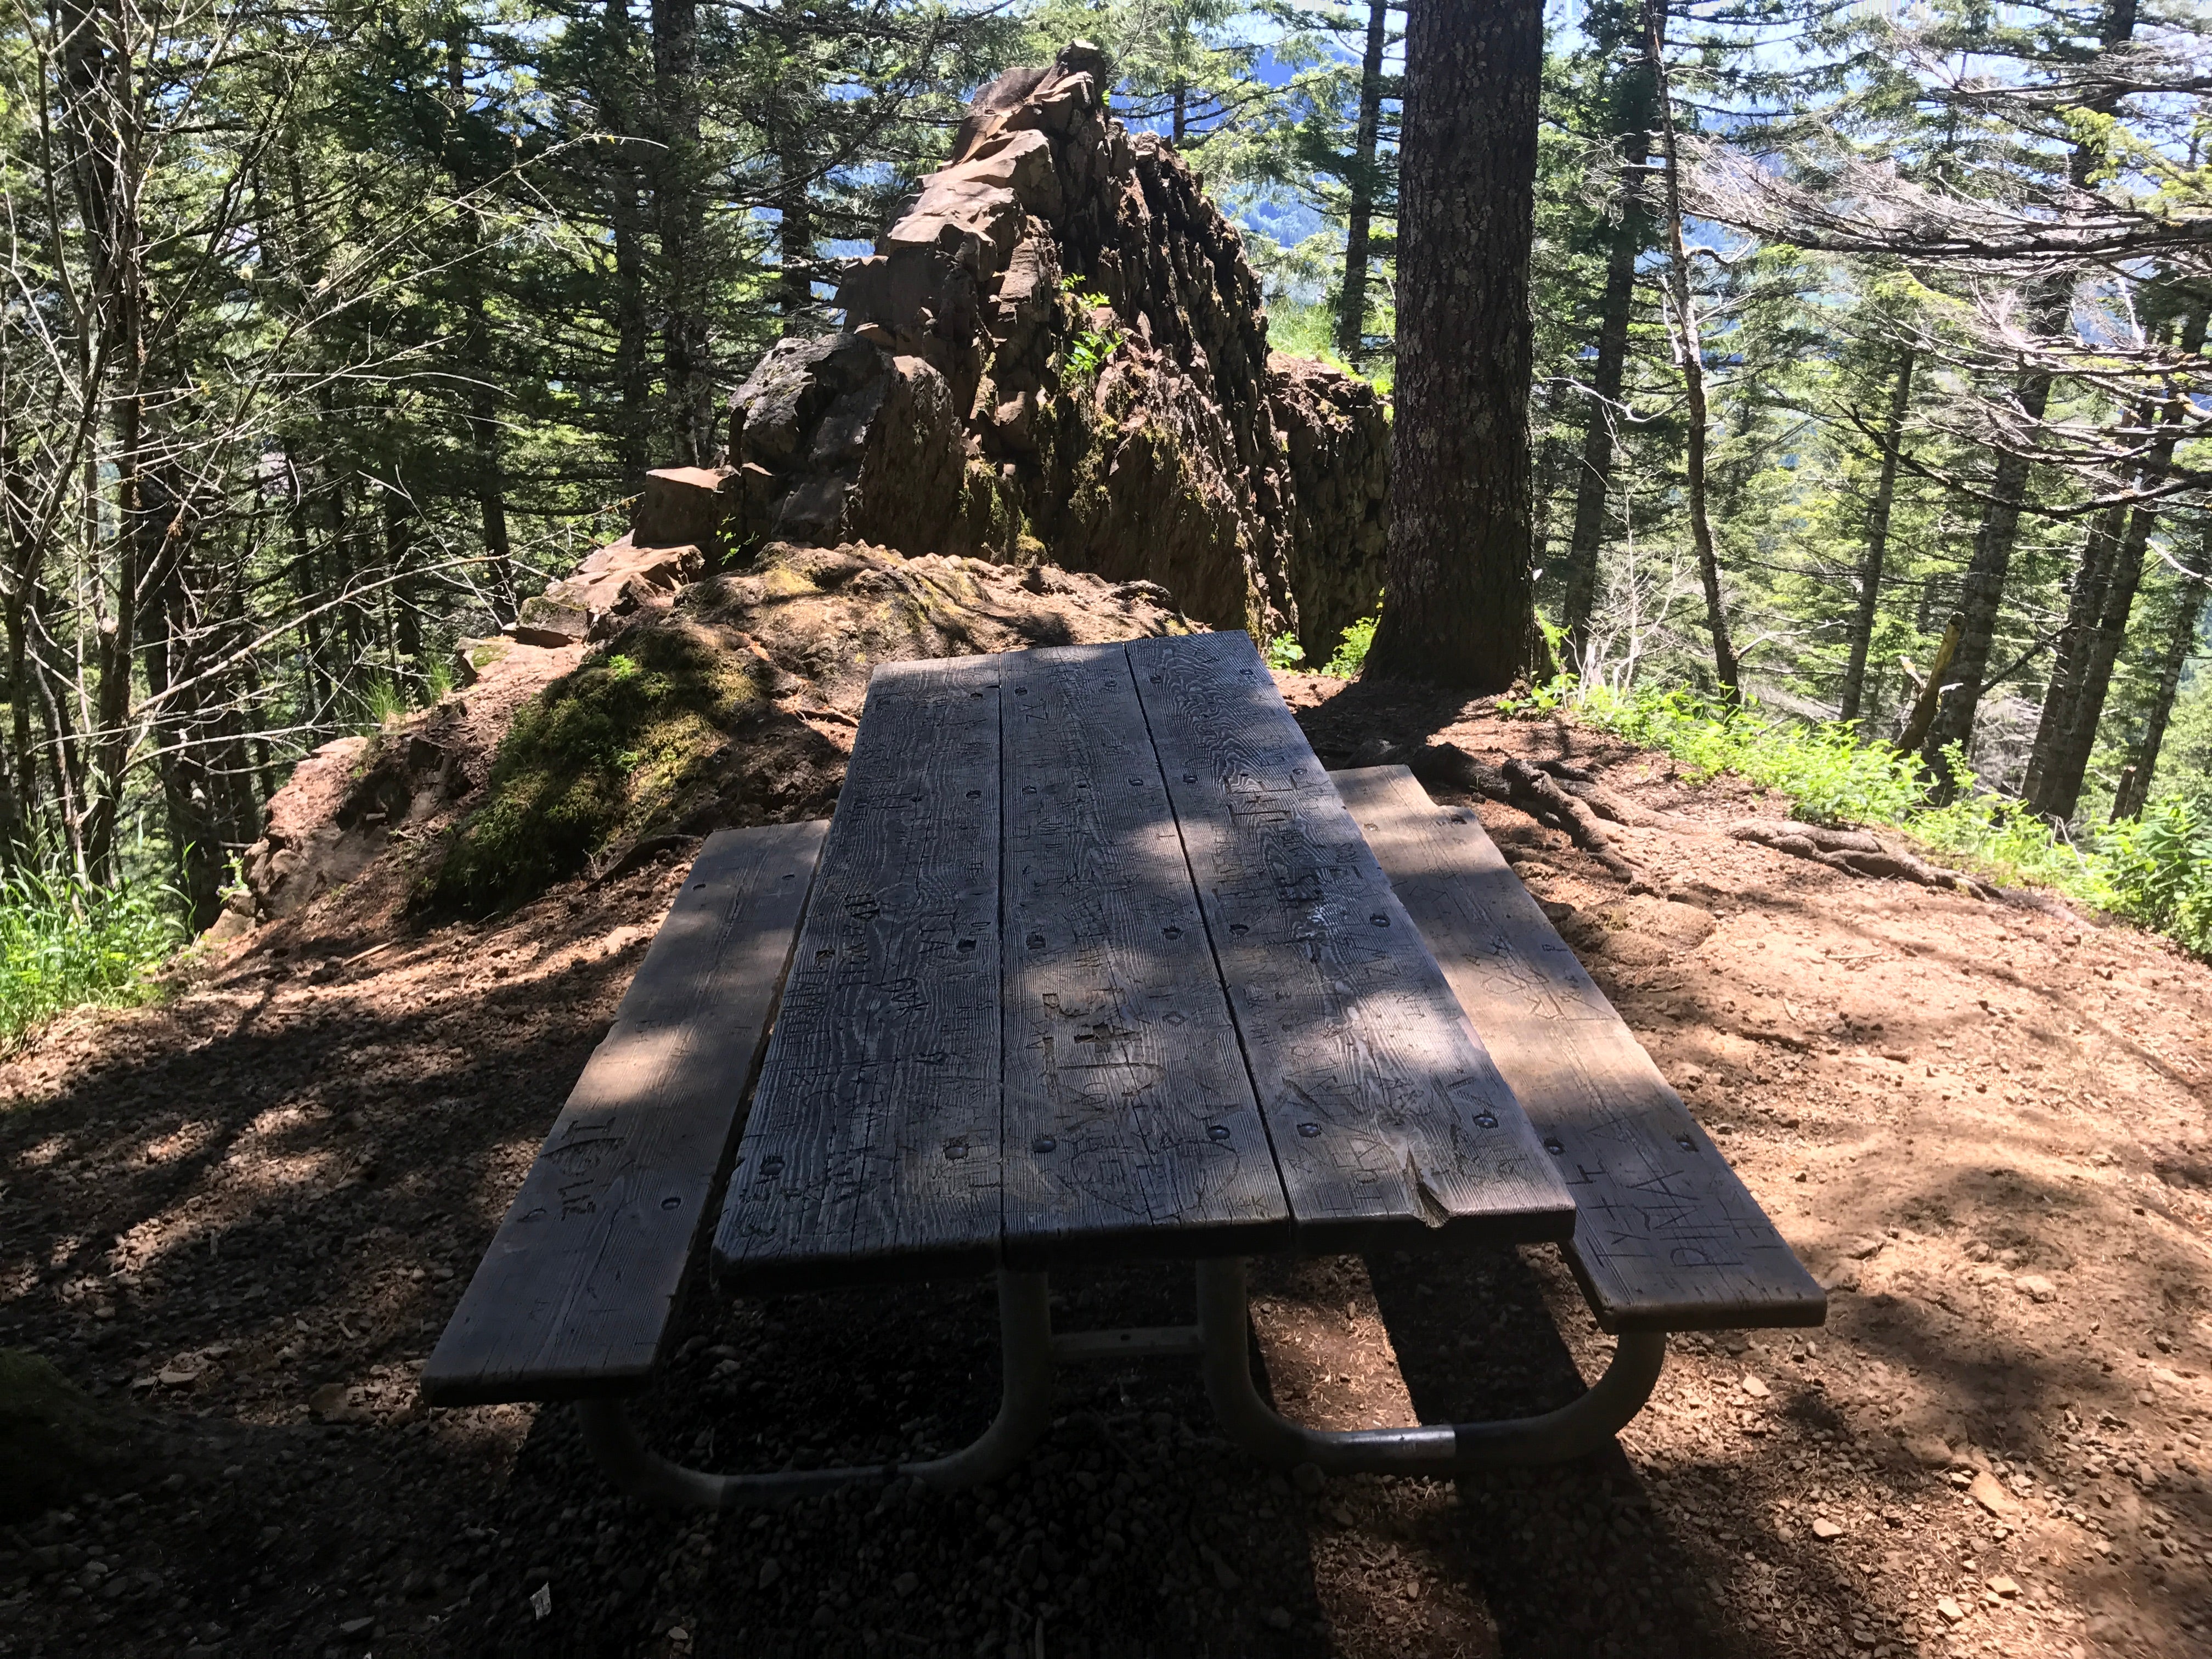 There are 2 picnic tables in really strange areas on the way up the mountain. It makes you wonder how they got there--but good if you need a break!